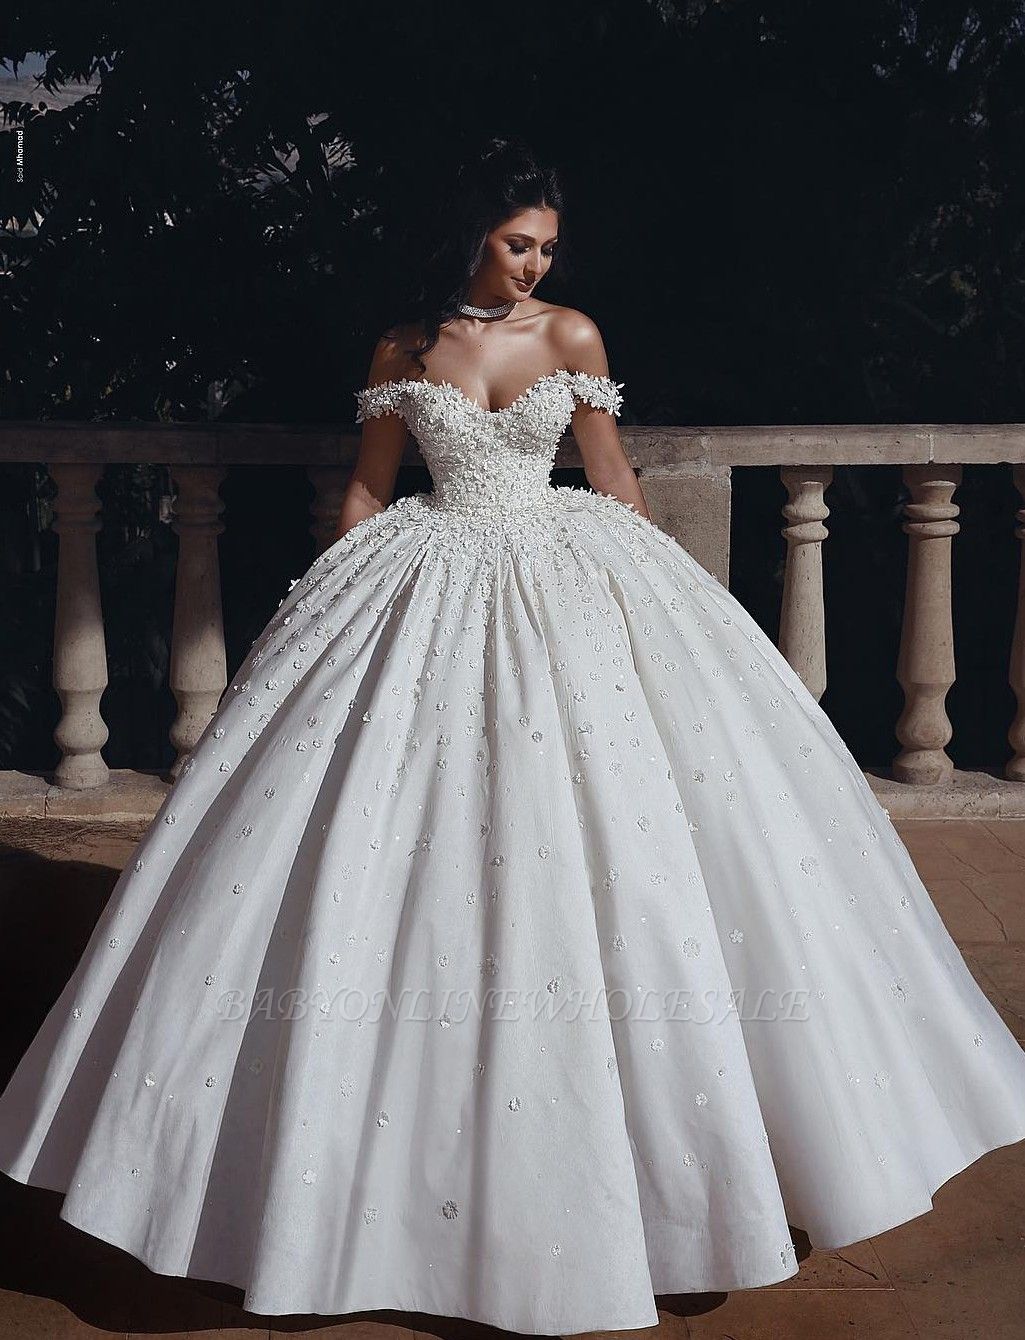 Gorgeous Off-the-shoulder Aline Ball Gown Wedding Dress ...